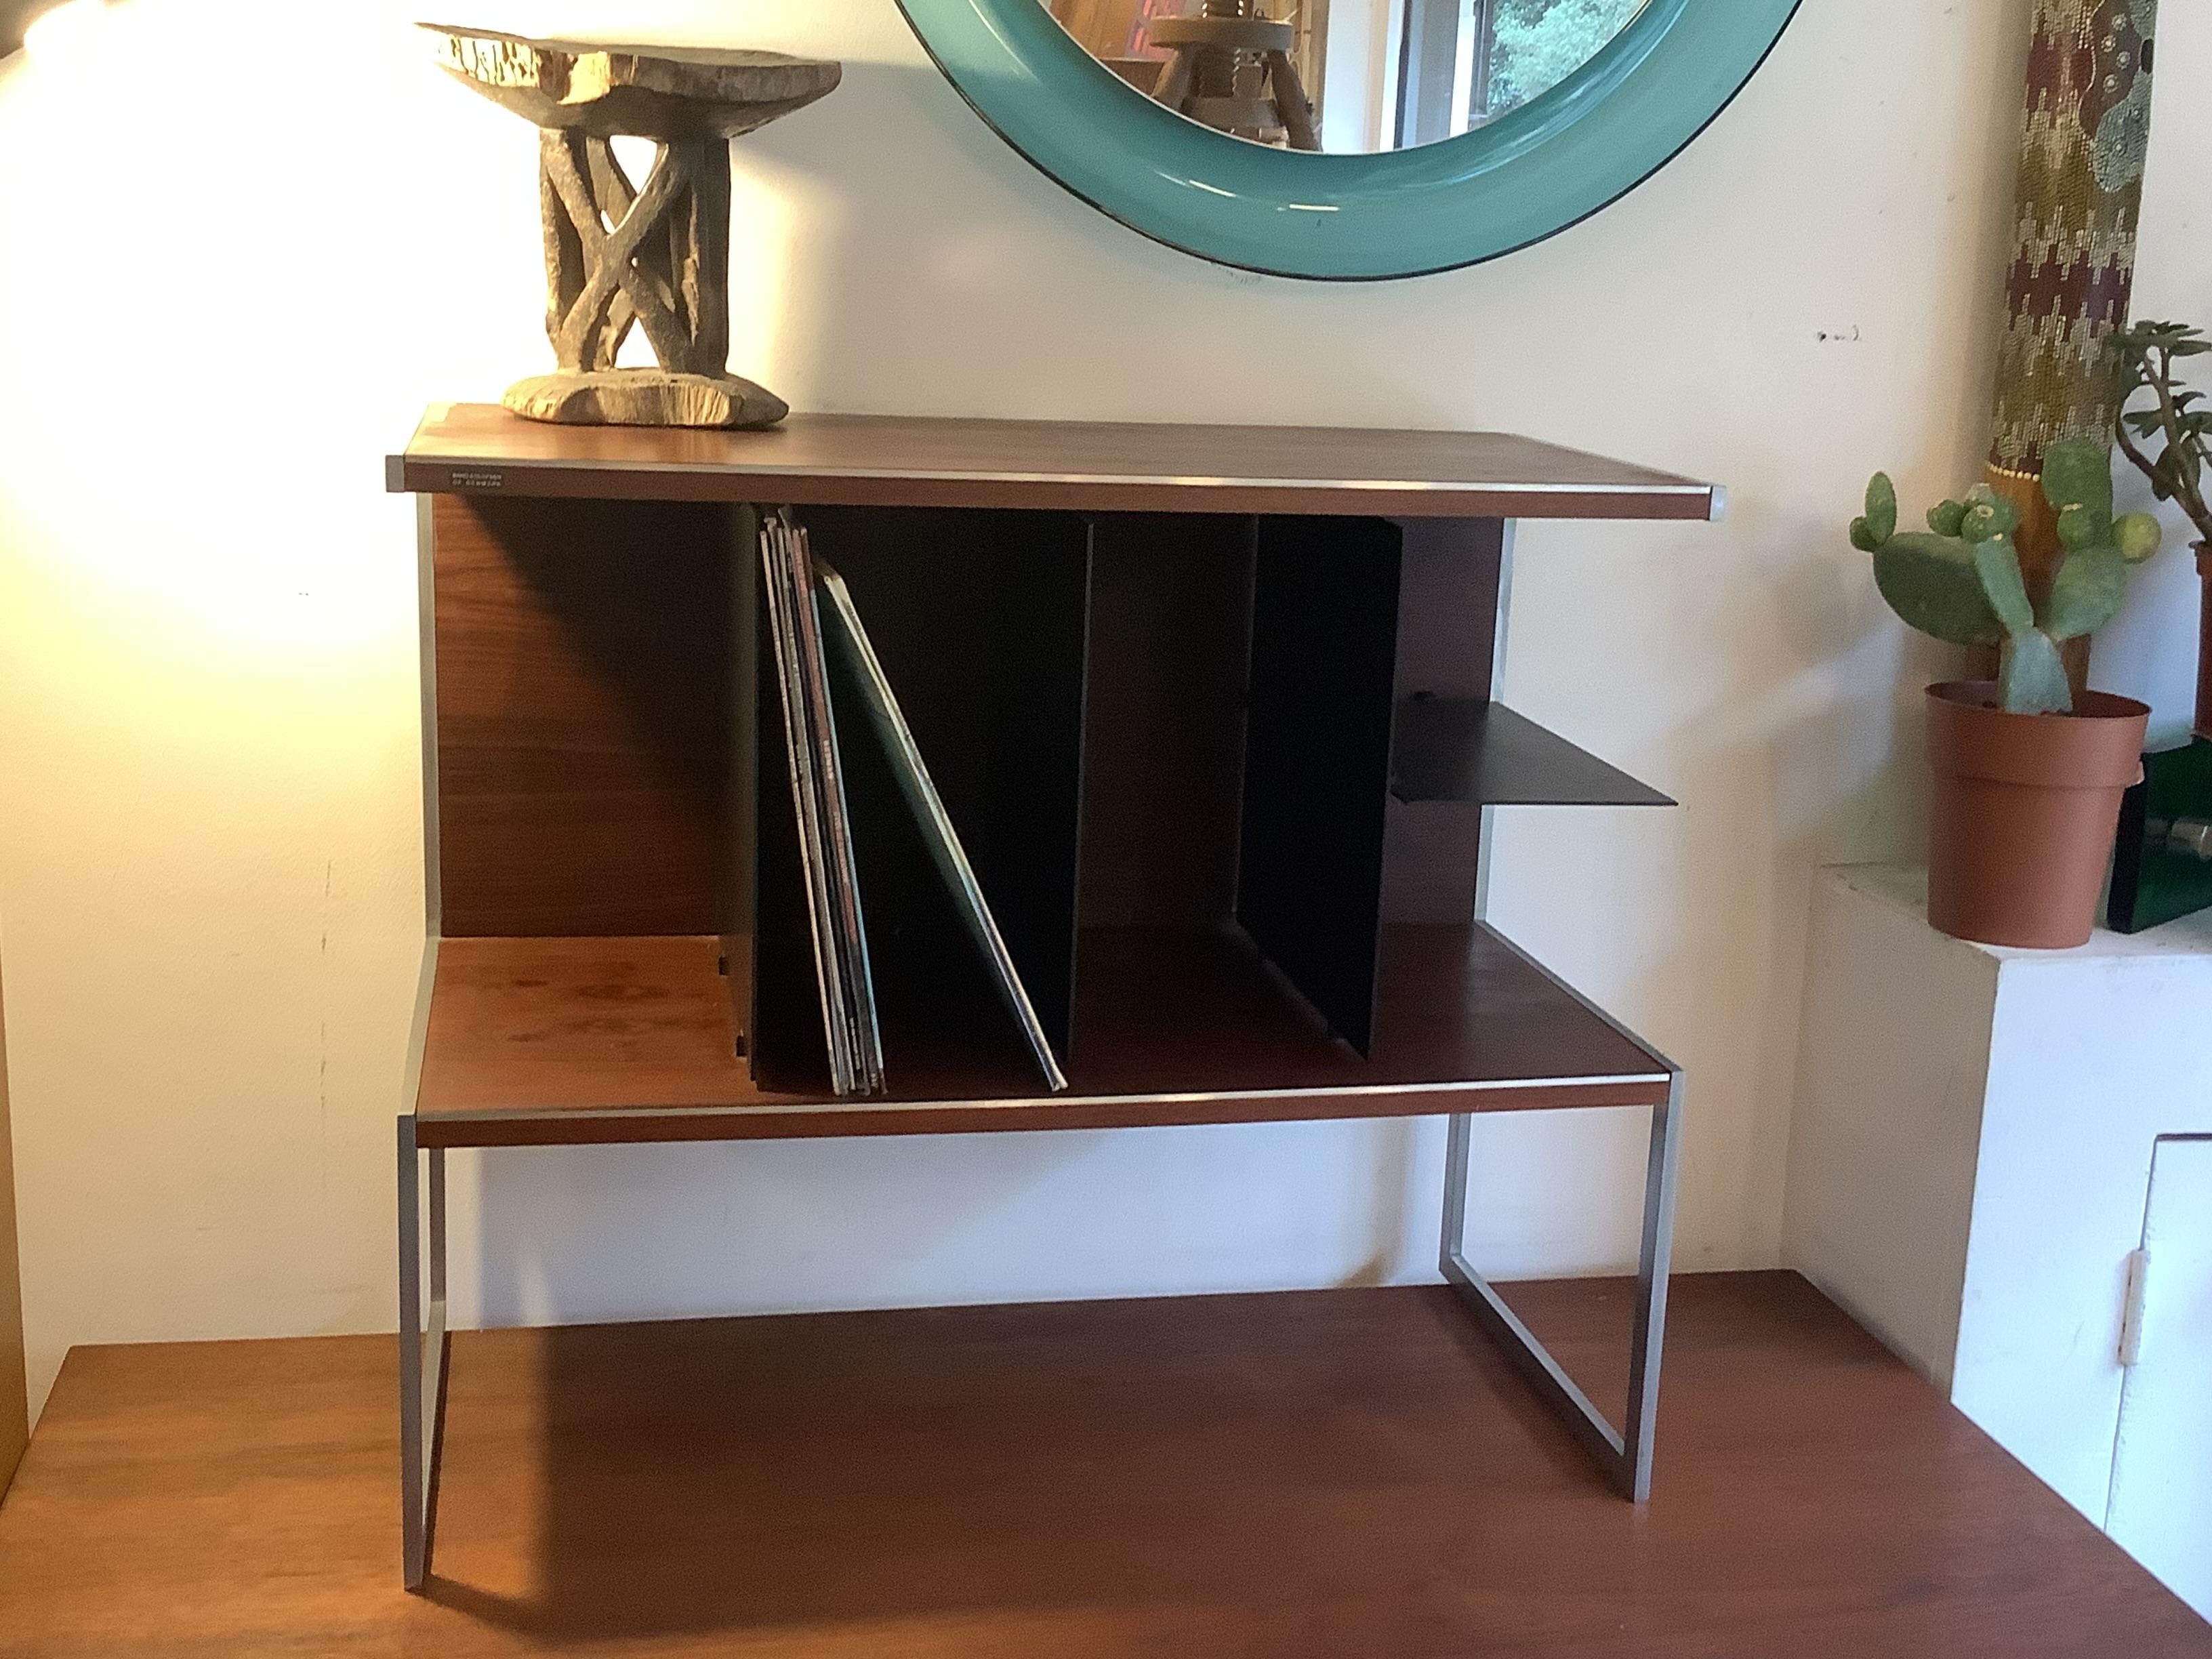 Stunning mid century rosewood and steel hi fi storage cabinet by Jacob Jensen for Bang and Olufsen. Made in Denmark in the 1970s. The labels says 'Bang and Olufsen of Denmark'. It has black metal dividers to keep your vinyl collection in order.
This